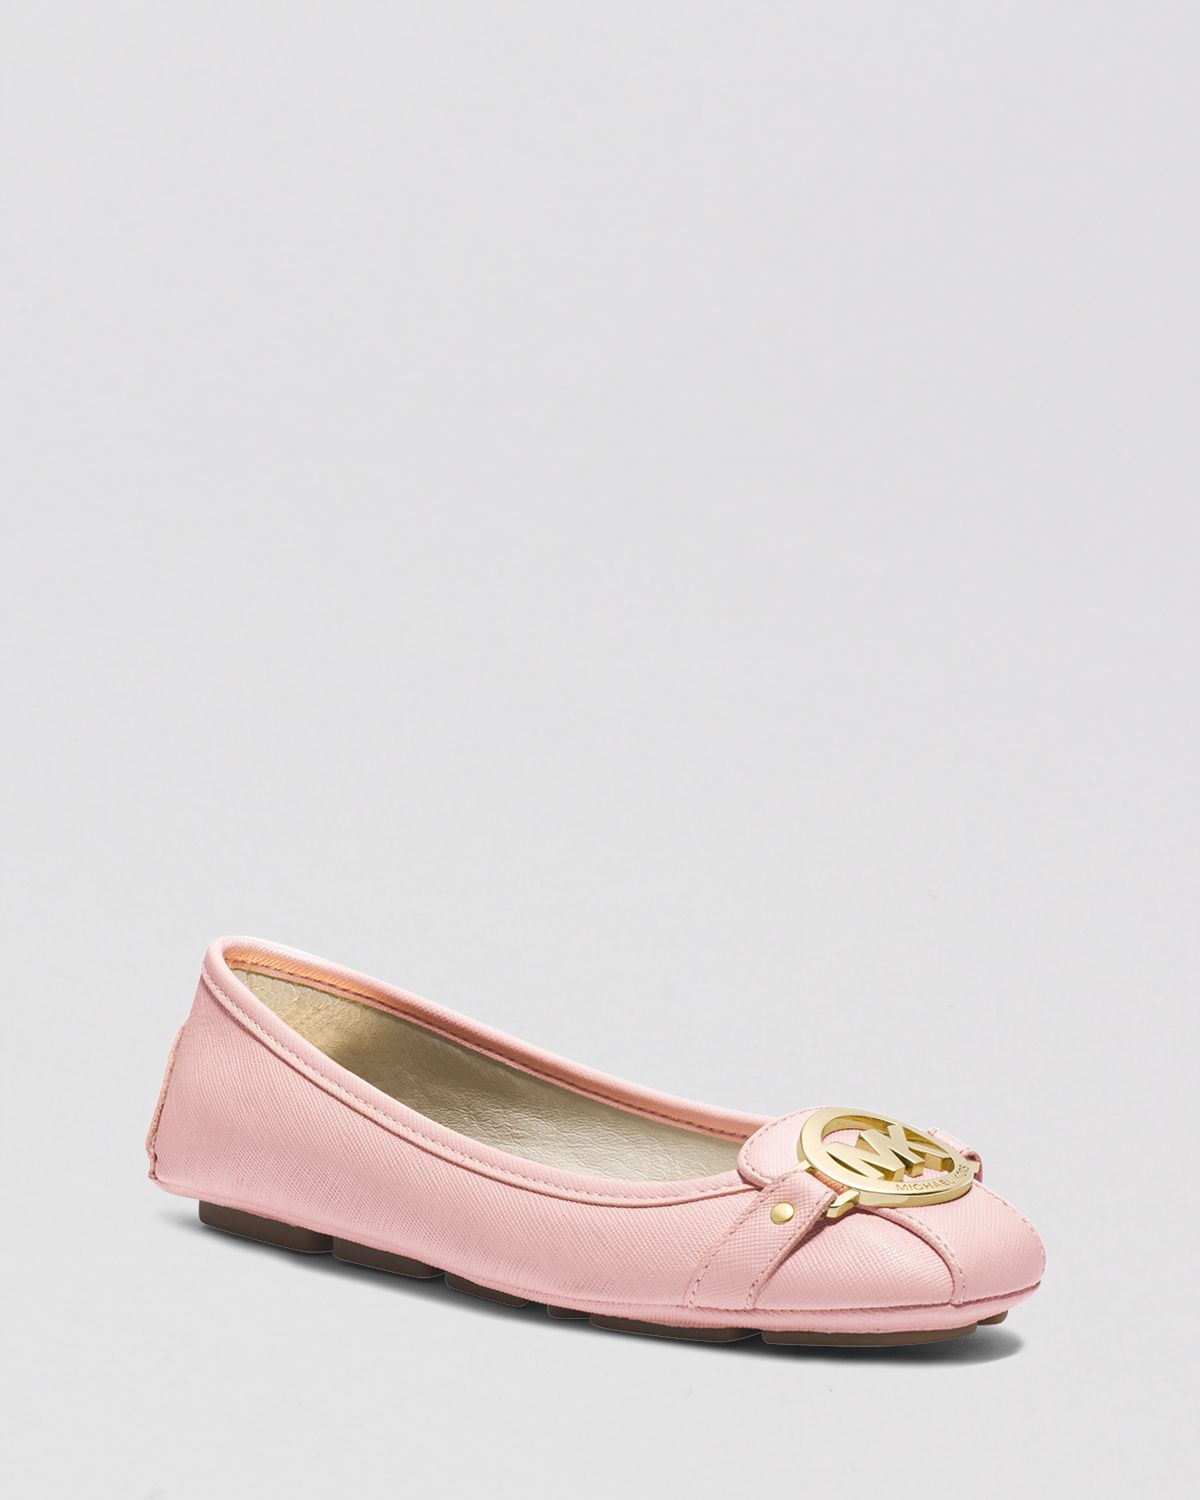 Michael Kors Pink Flats Online Sale, UP TO 60% OFF